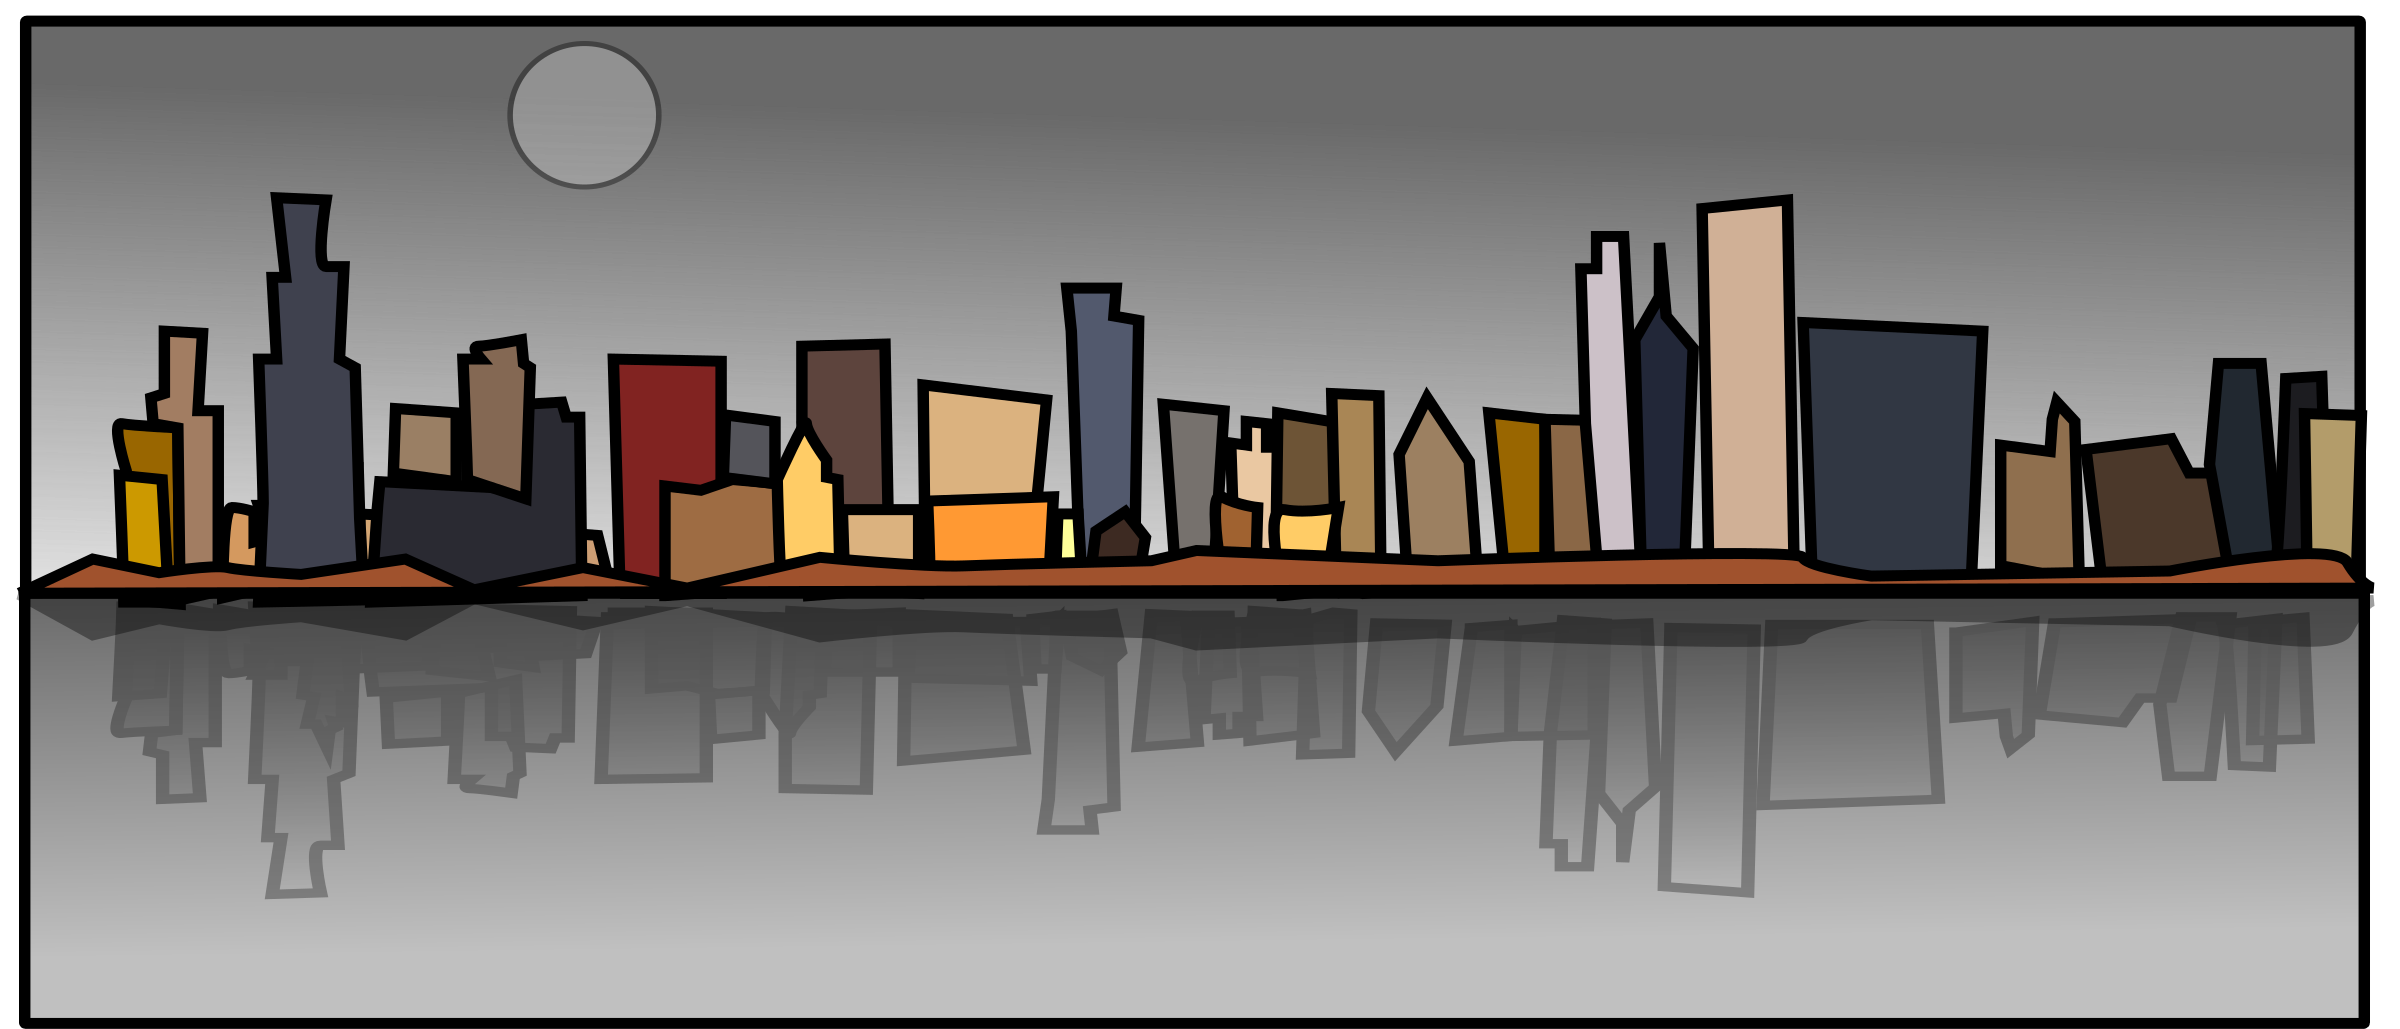 cityscape clipart waterfront